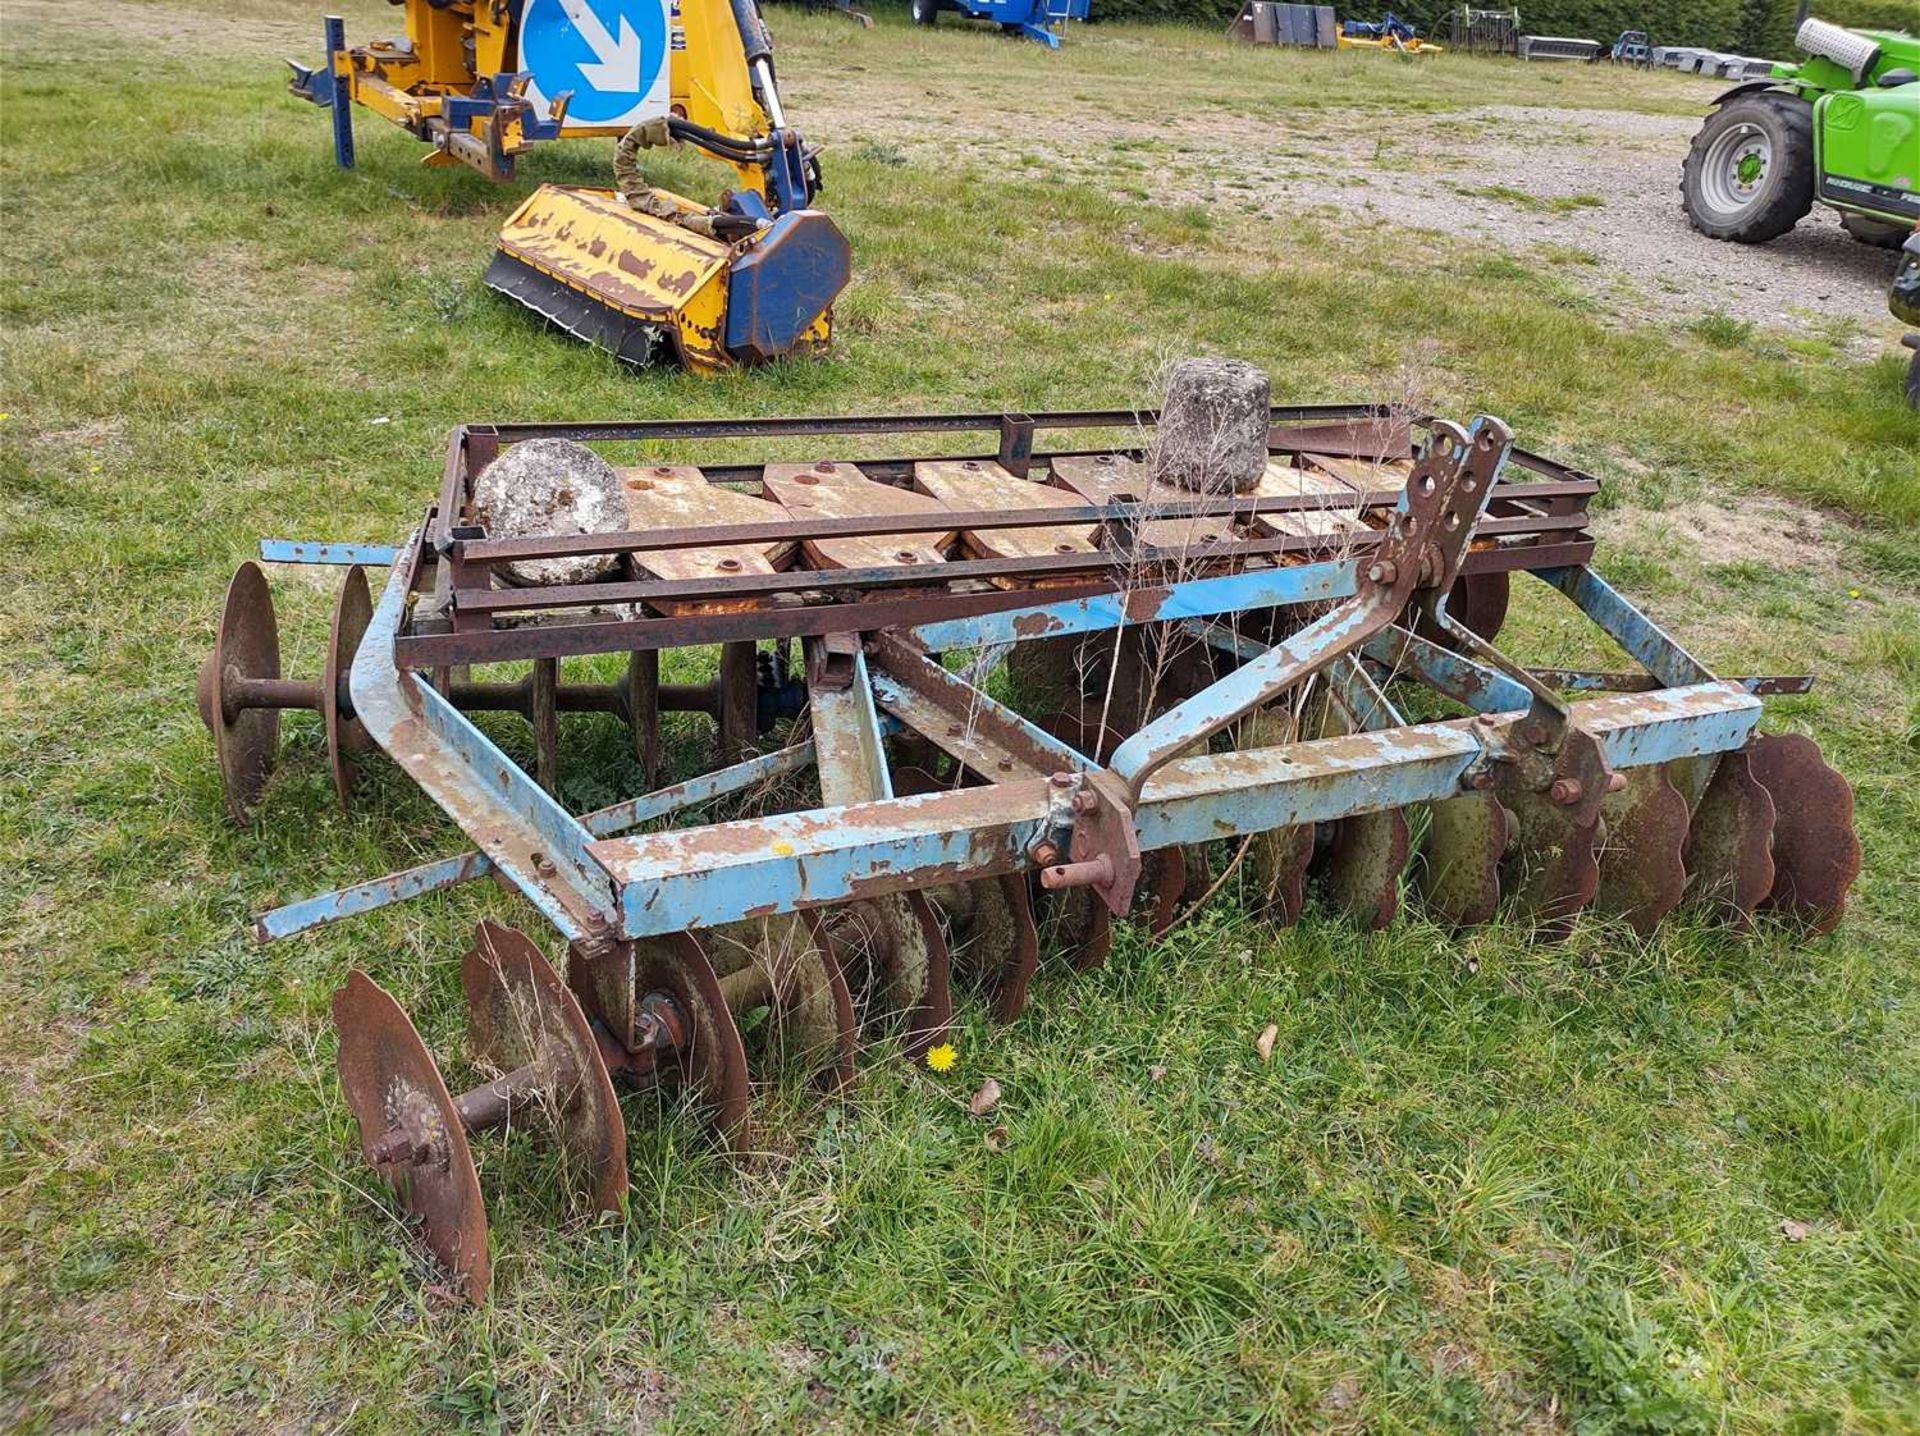 Ransomes Disc Harrow (1991) not Including Weights